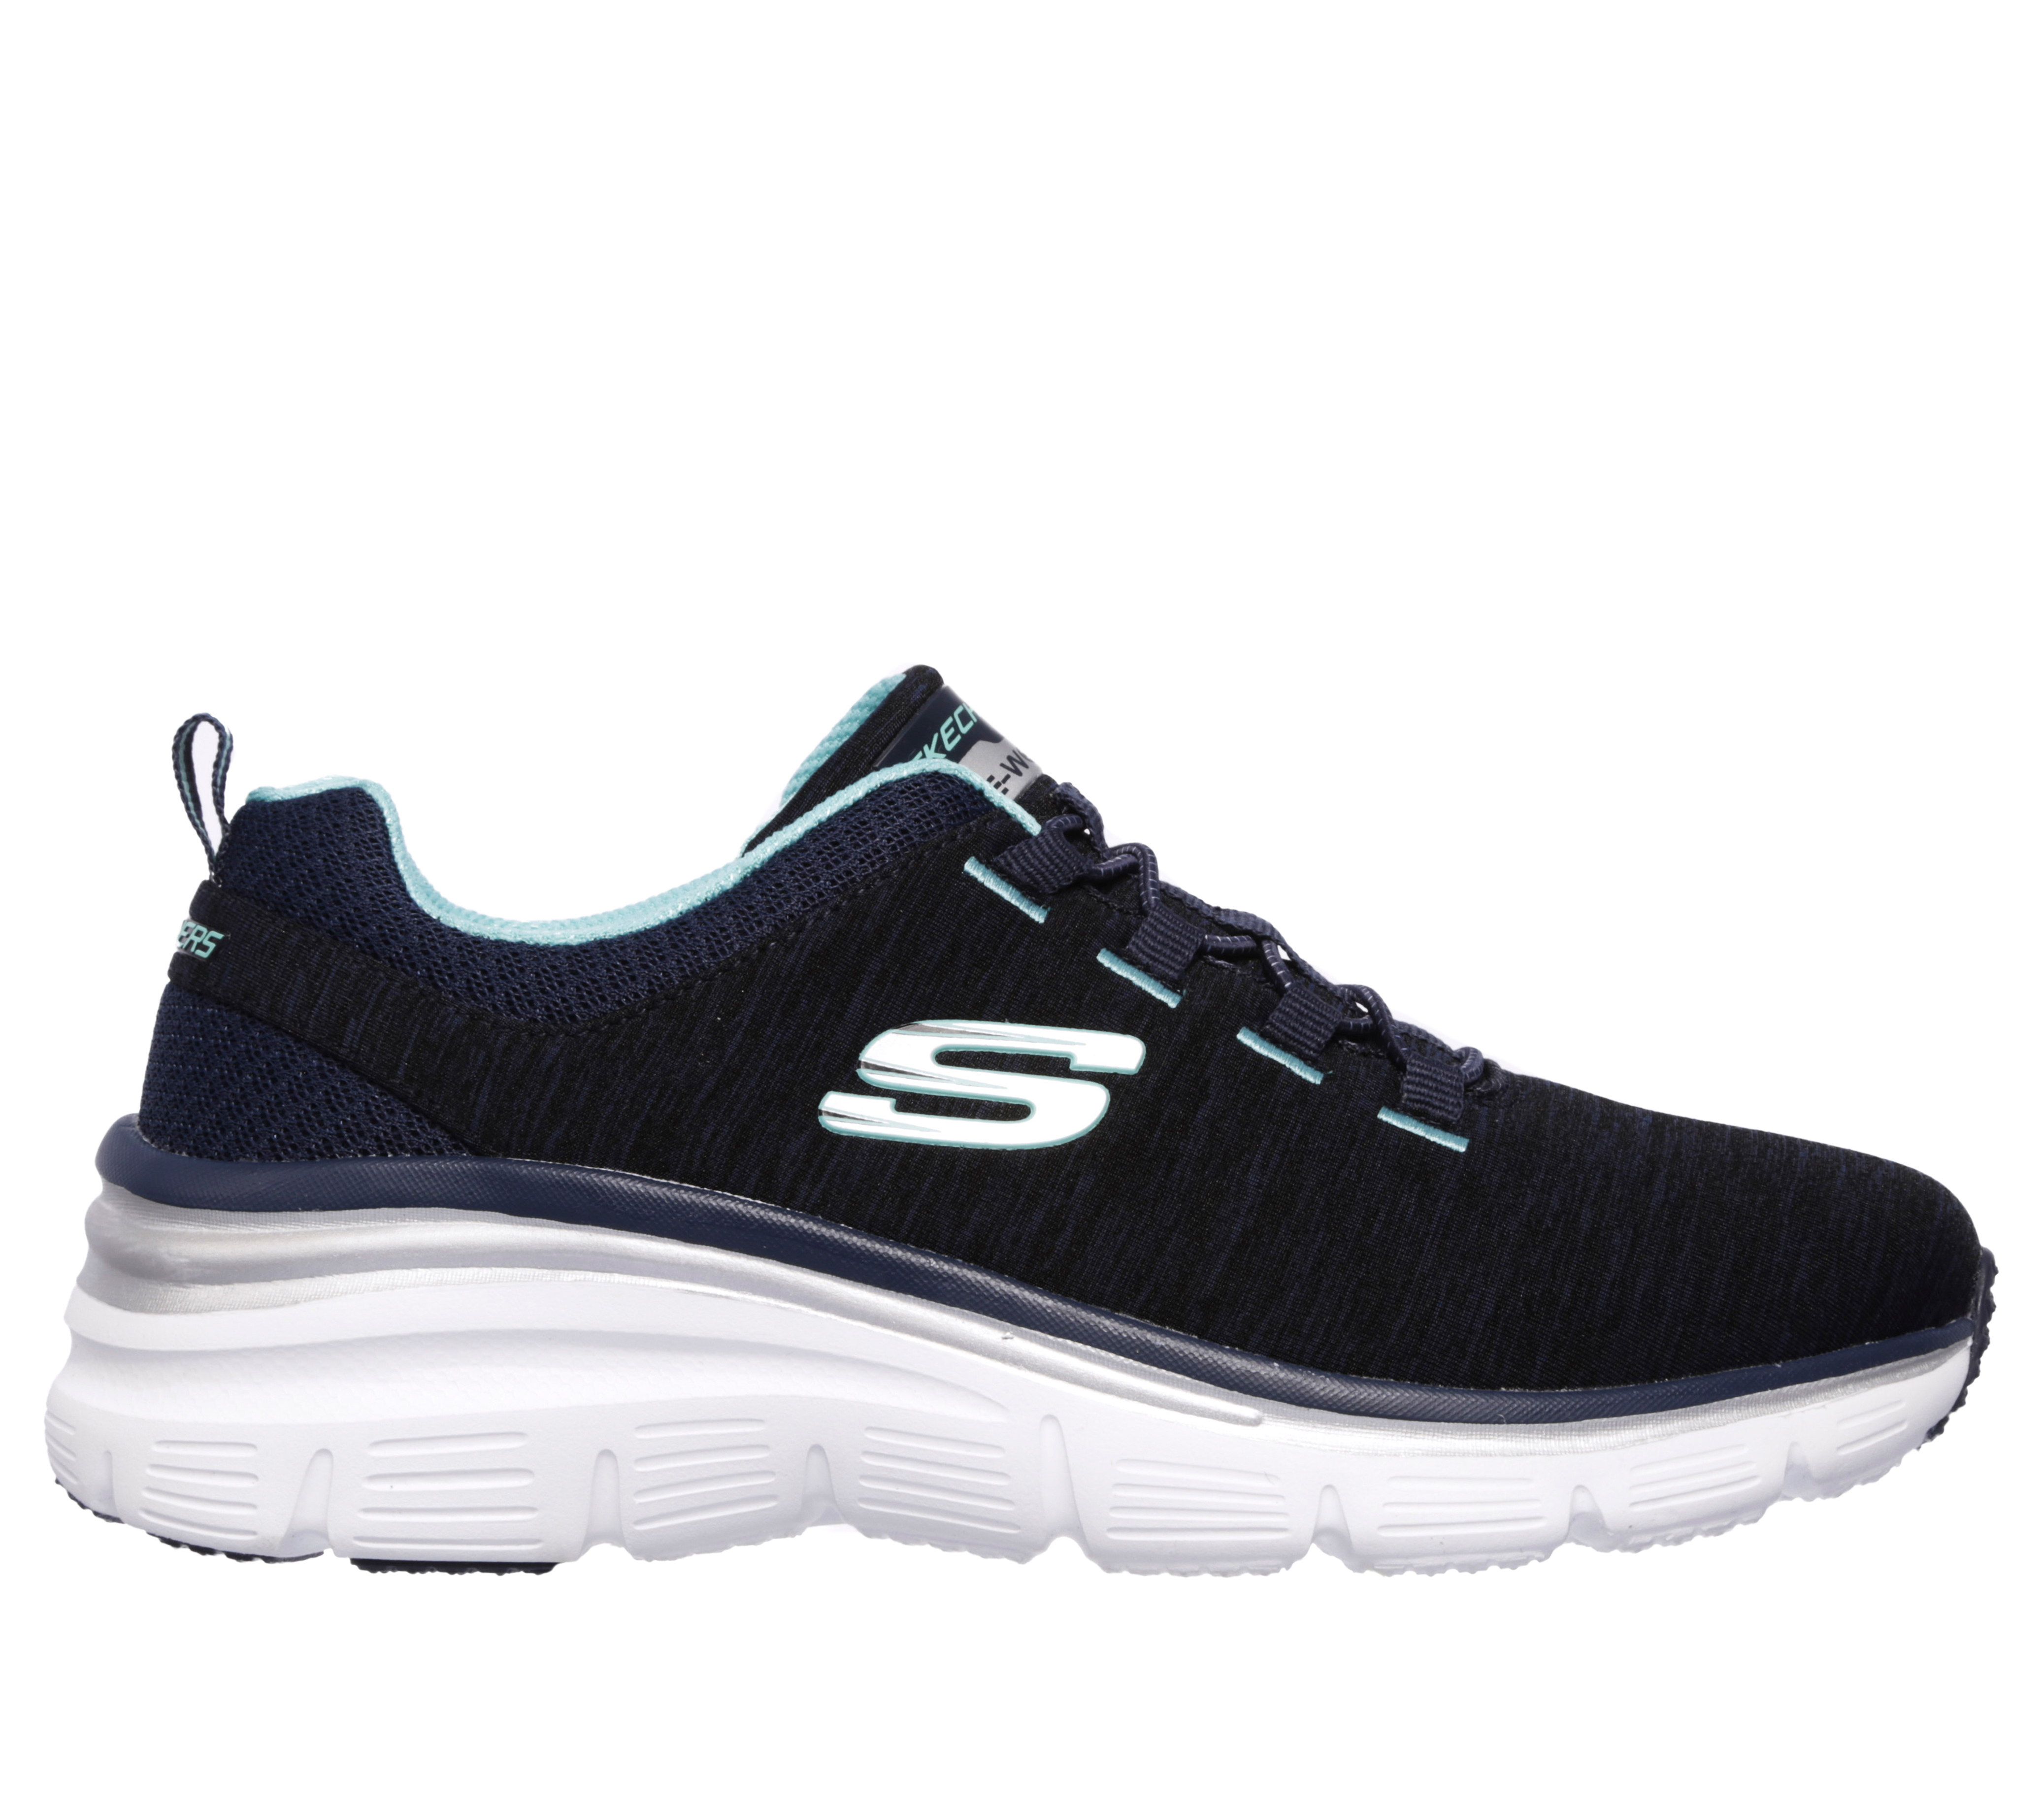 skechers new collection 2016